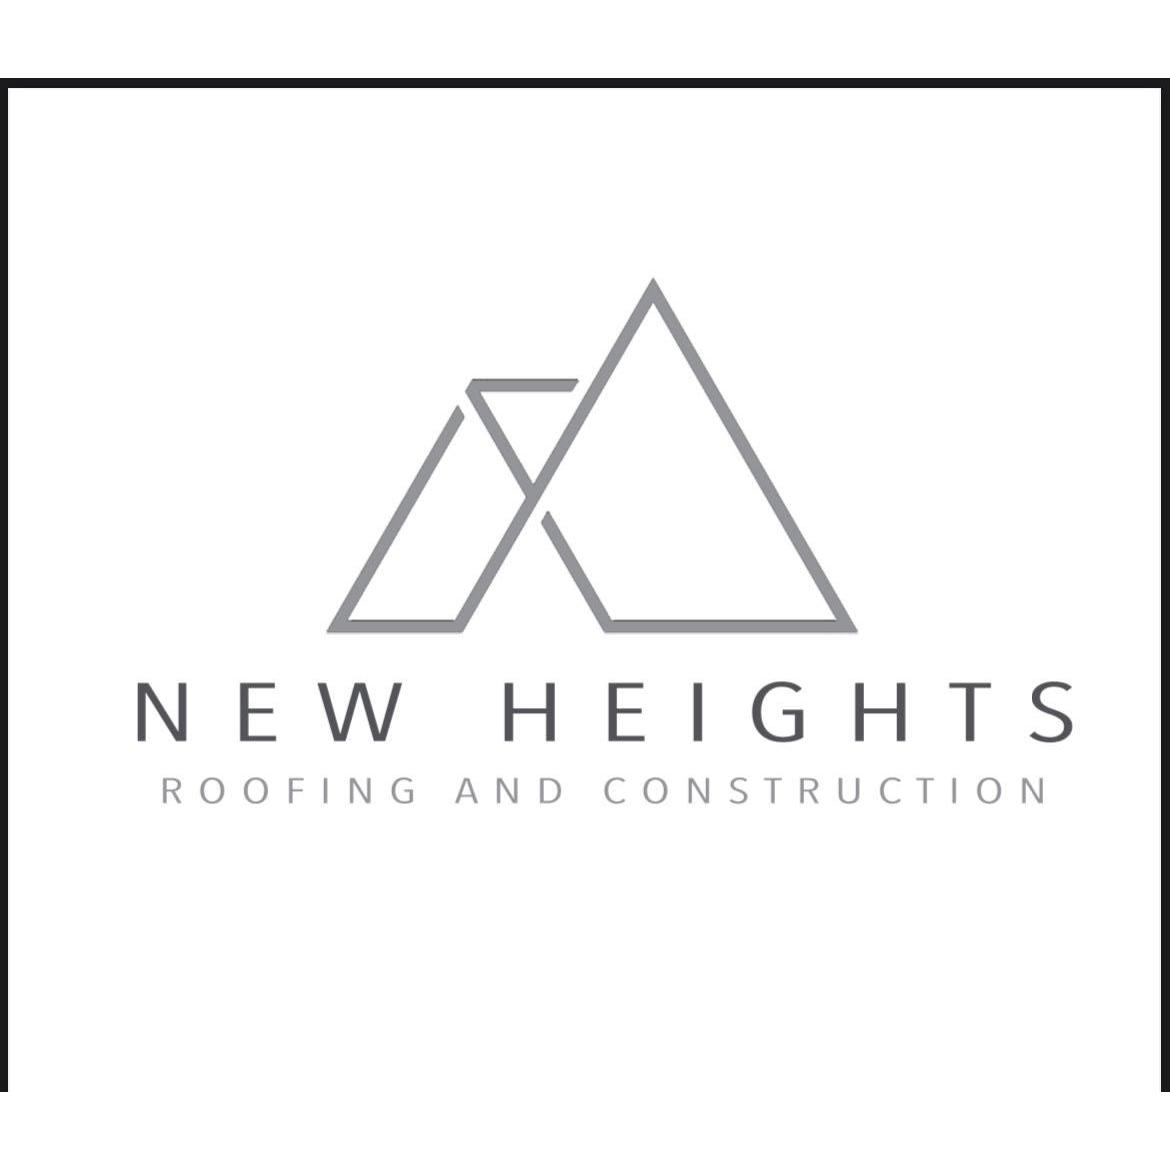 New Heights Roofing and Construction Logo